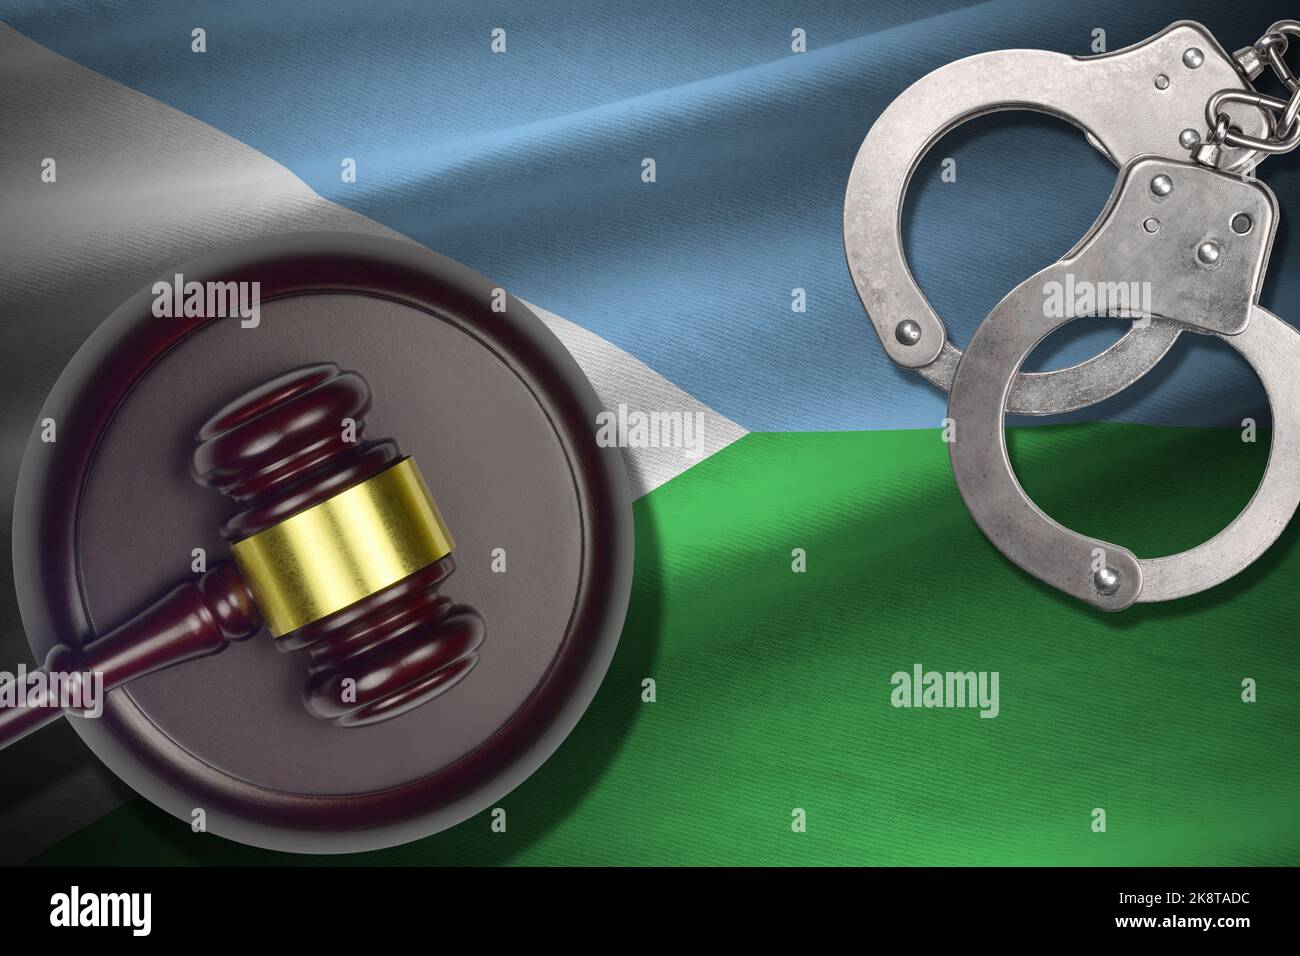 Djibouti flag with judge mallet and handcuffs in dark room. Concept of criminal and punishment, background for guilty topics Stock Photo